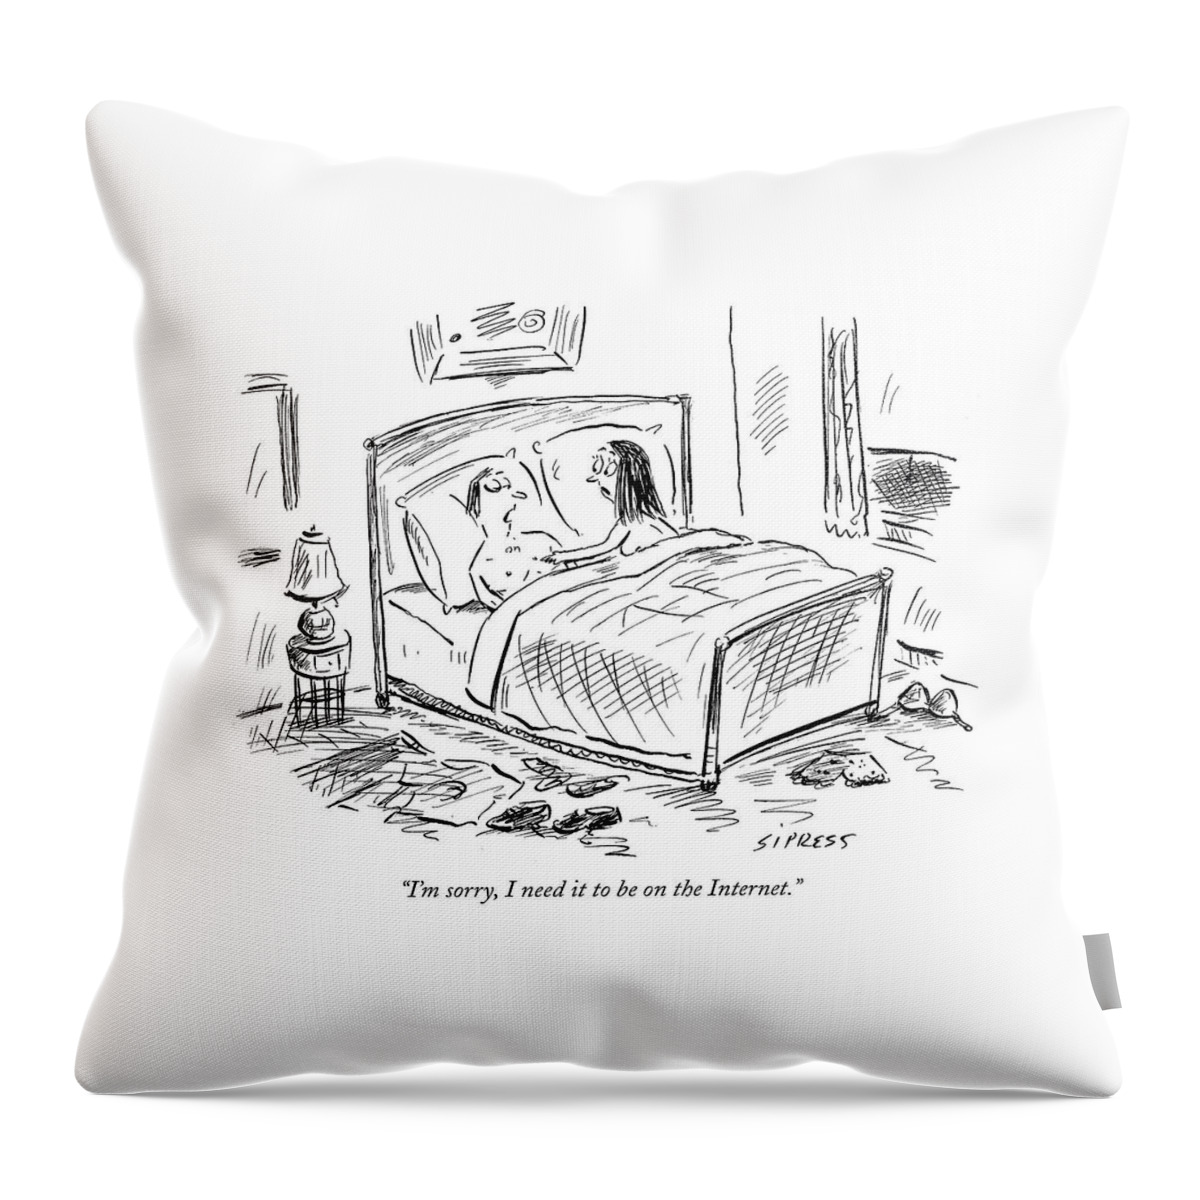 I'm Sorry, I Need It To Be On The Internet Throw Pillow